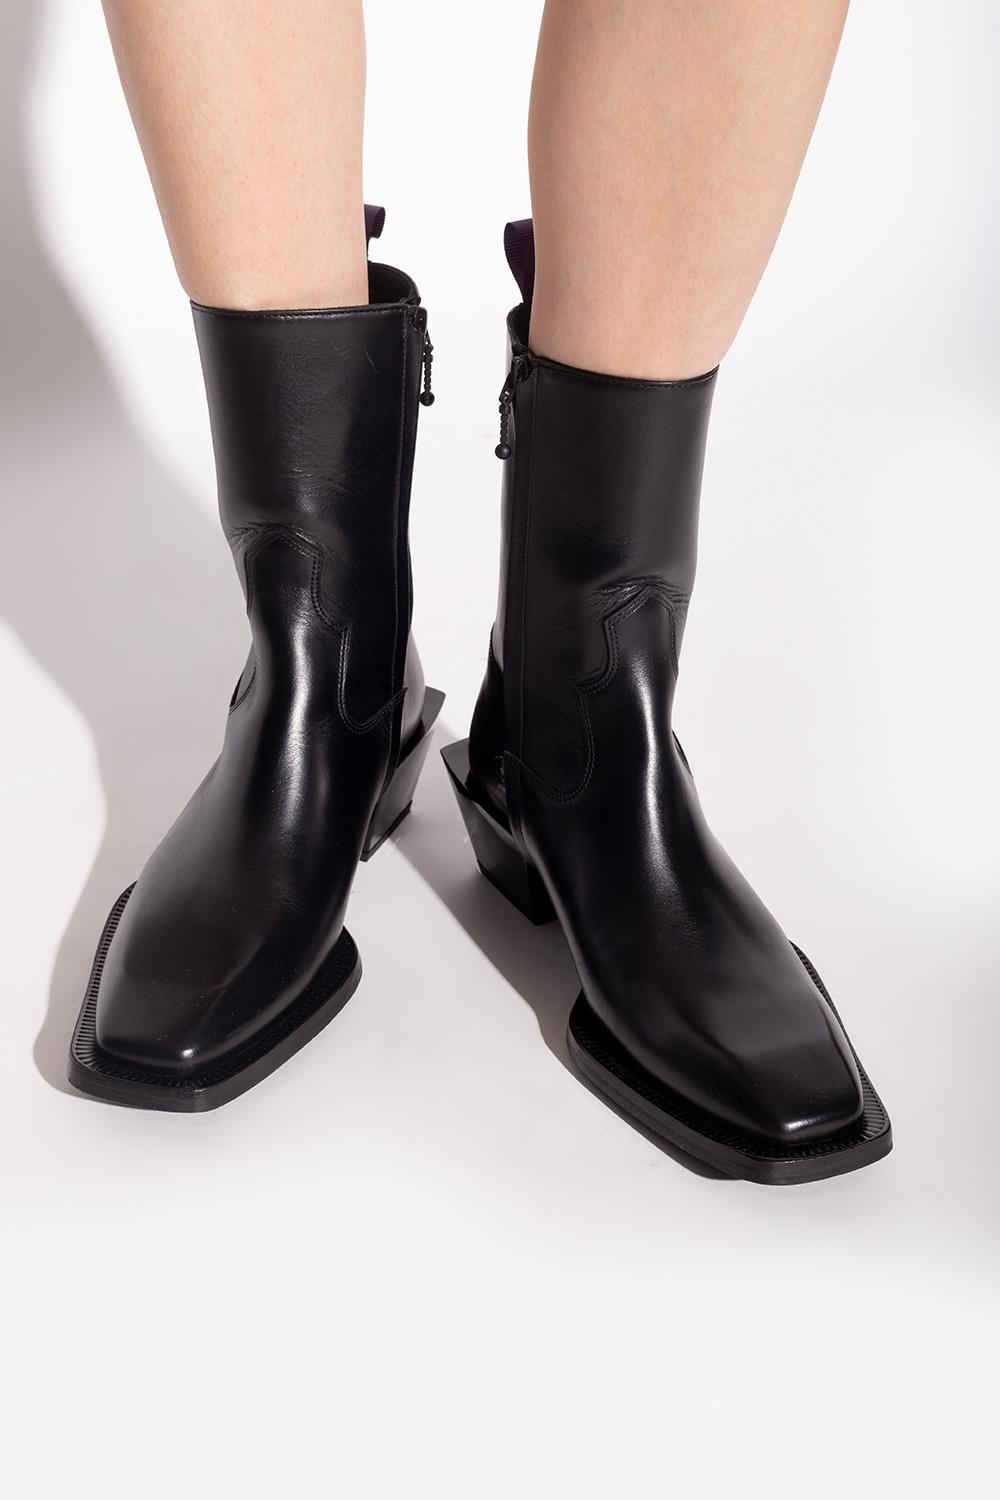 Eytys 'luciano' Heeled Ankle Boots in Black | Lyst